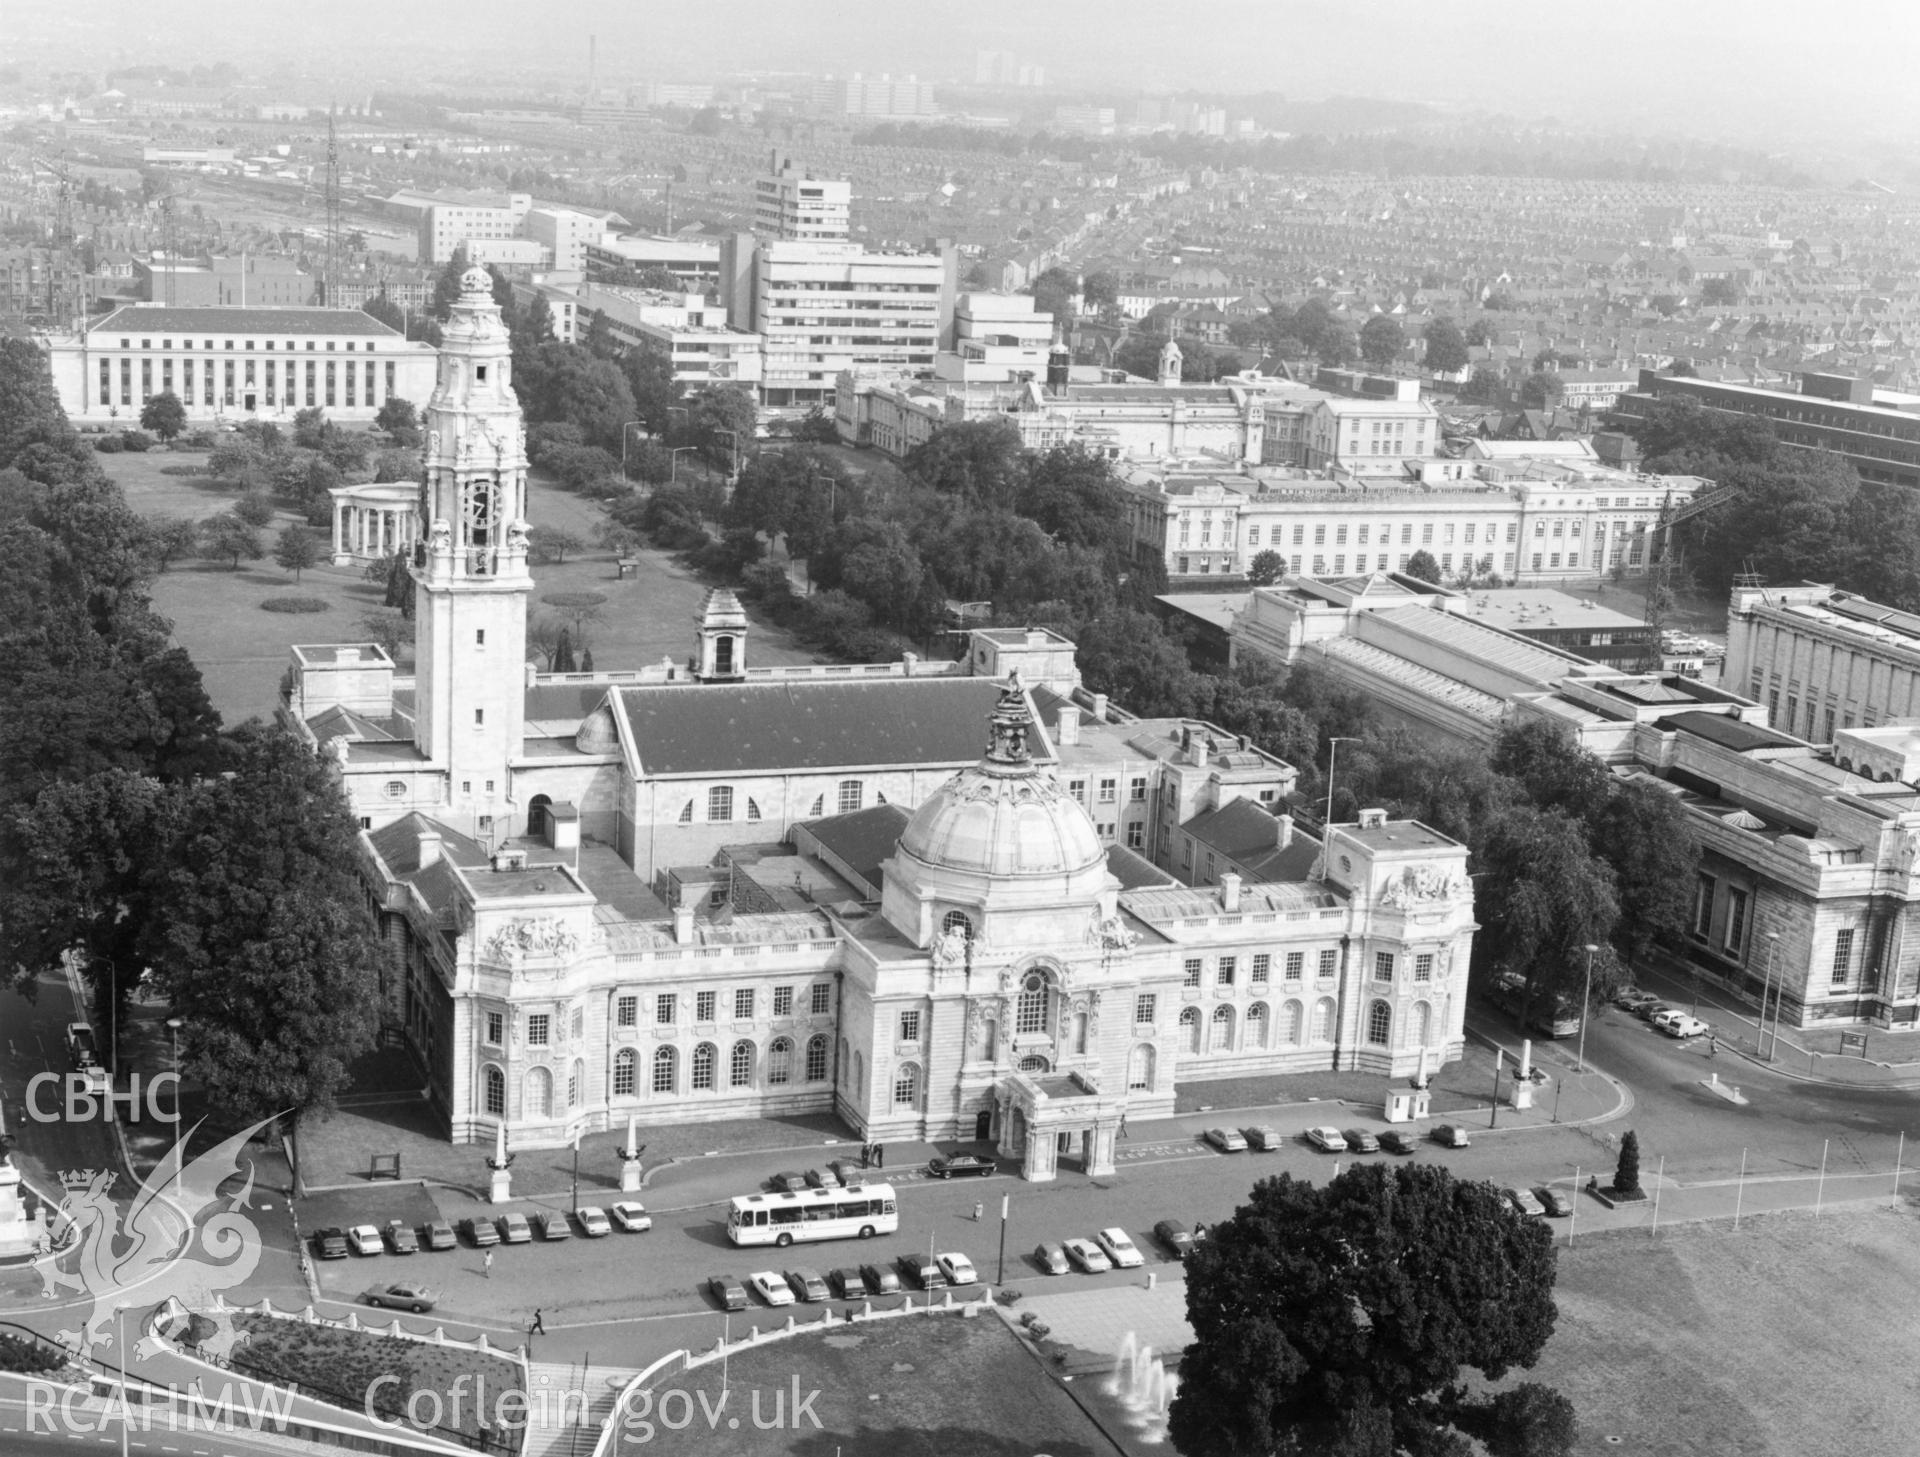 1 b/w print showing aerial oblique view of Cardiff City Hall; collated by the former Central Office of Information.